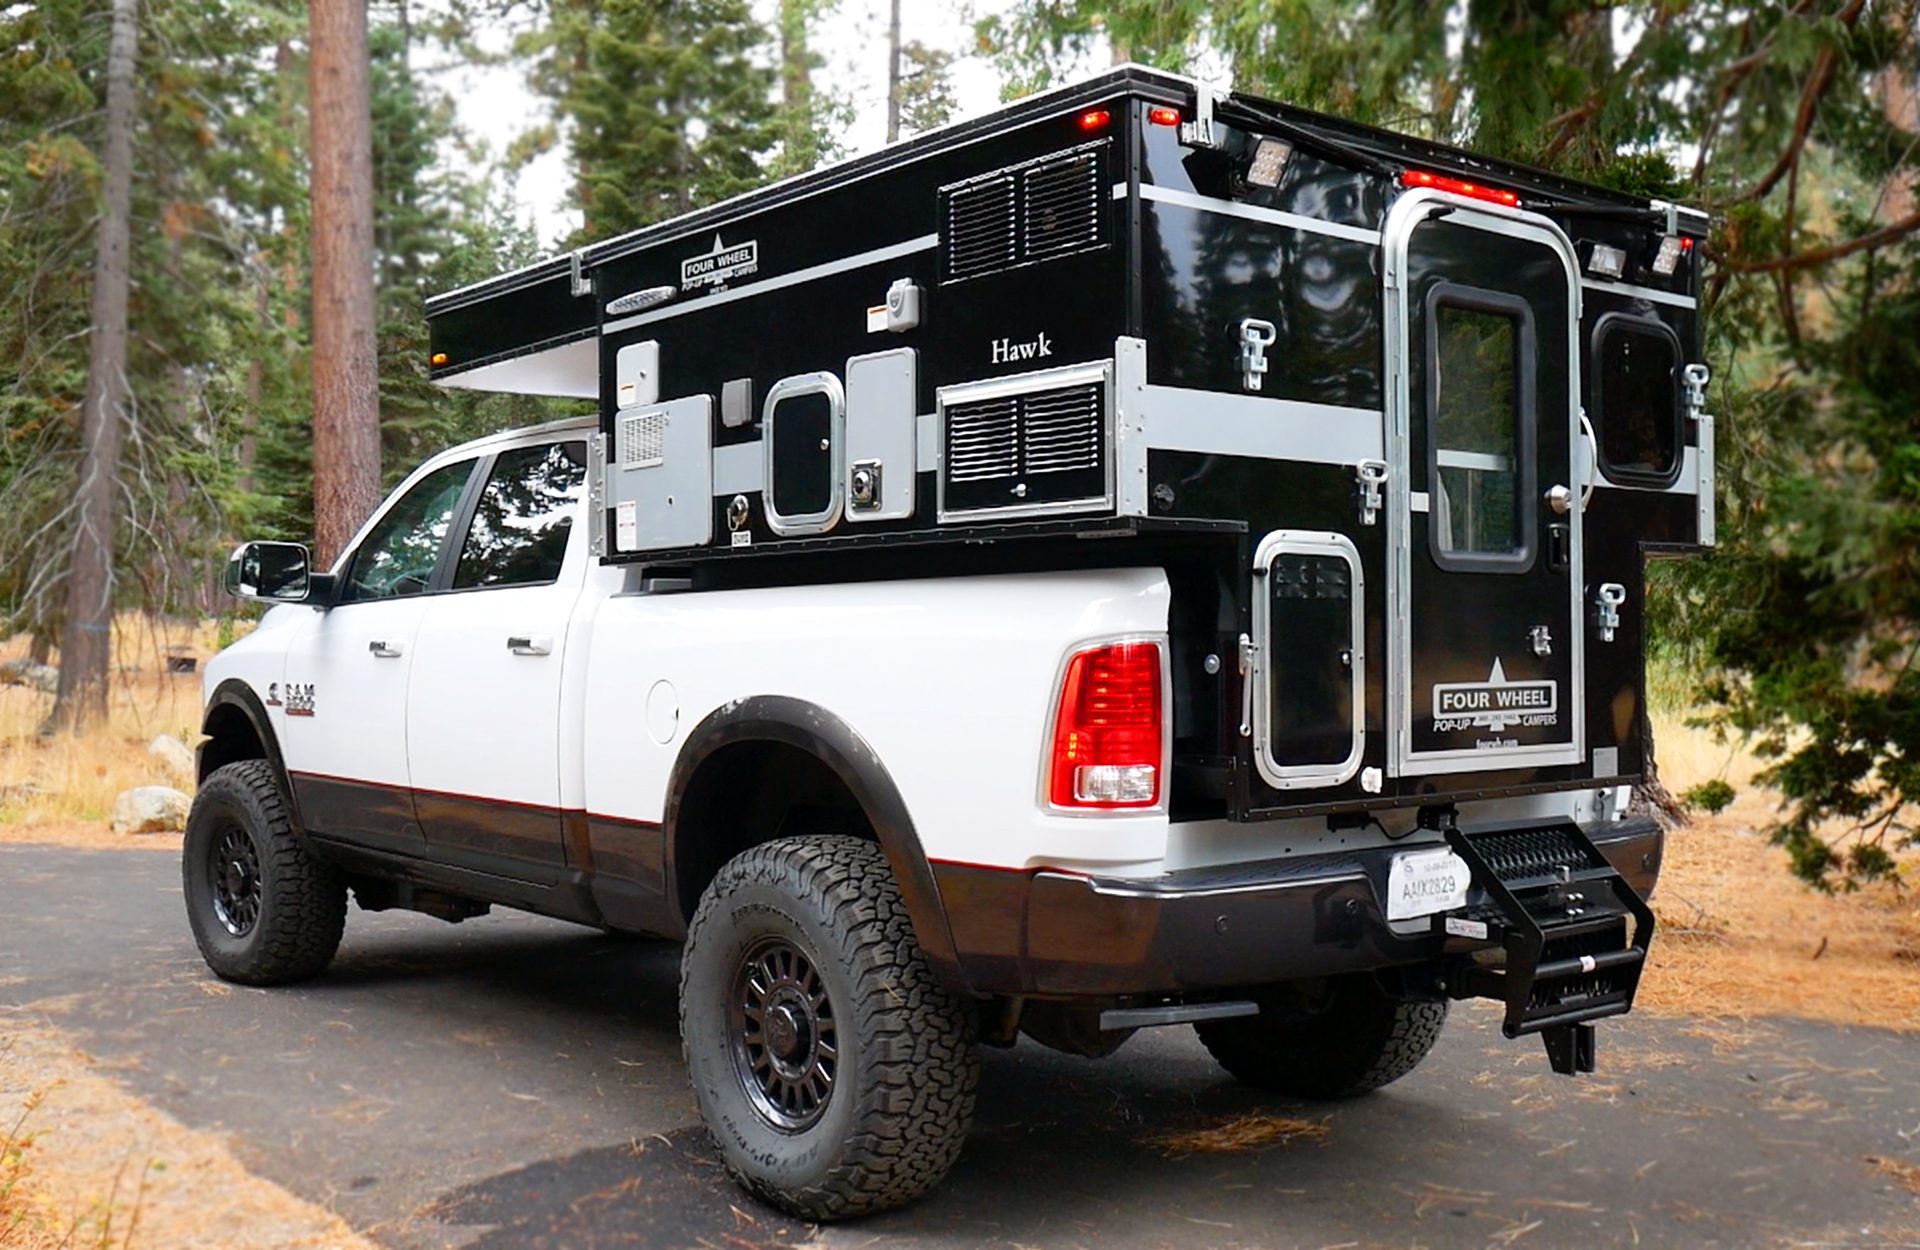 Four Wheel Campers Are Changing The Overlanding World Forever! All Terrain Campers Vs Four Wheel Campers